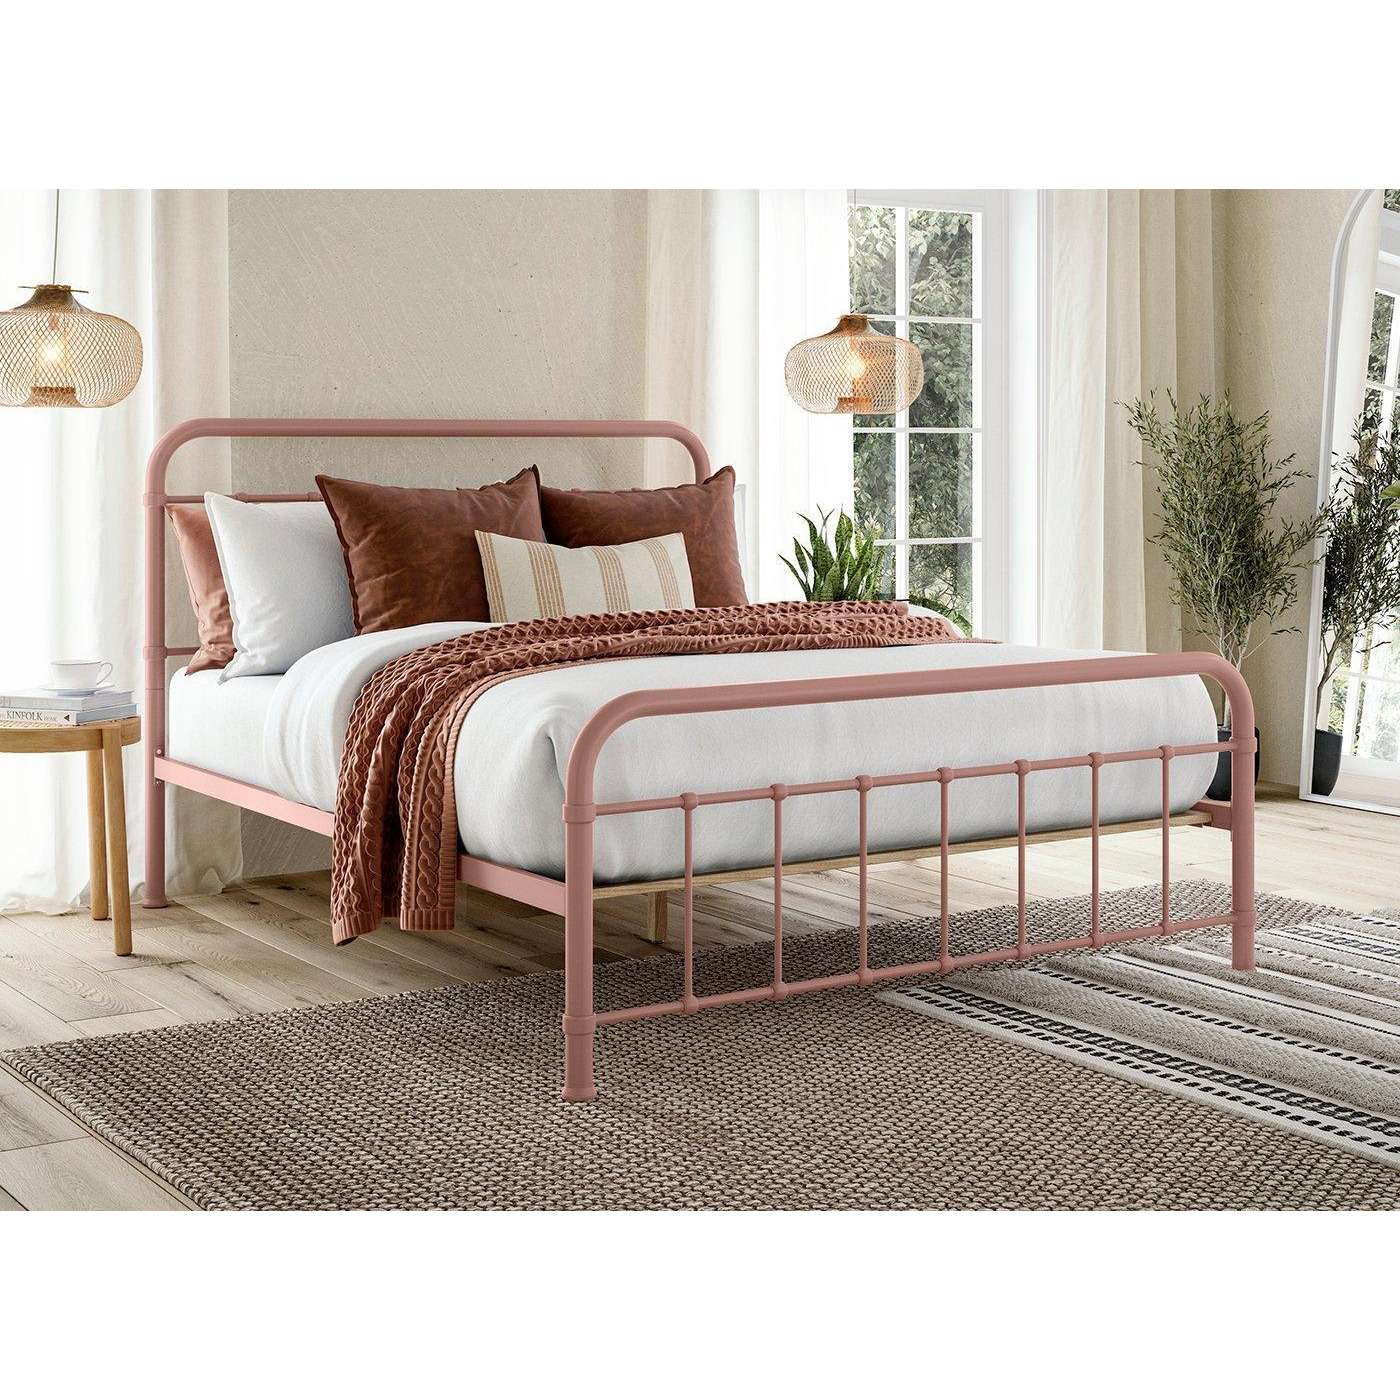 Abbey Metal Bed Frame - 4'6 Double - Pink